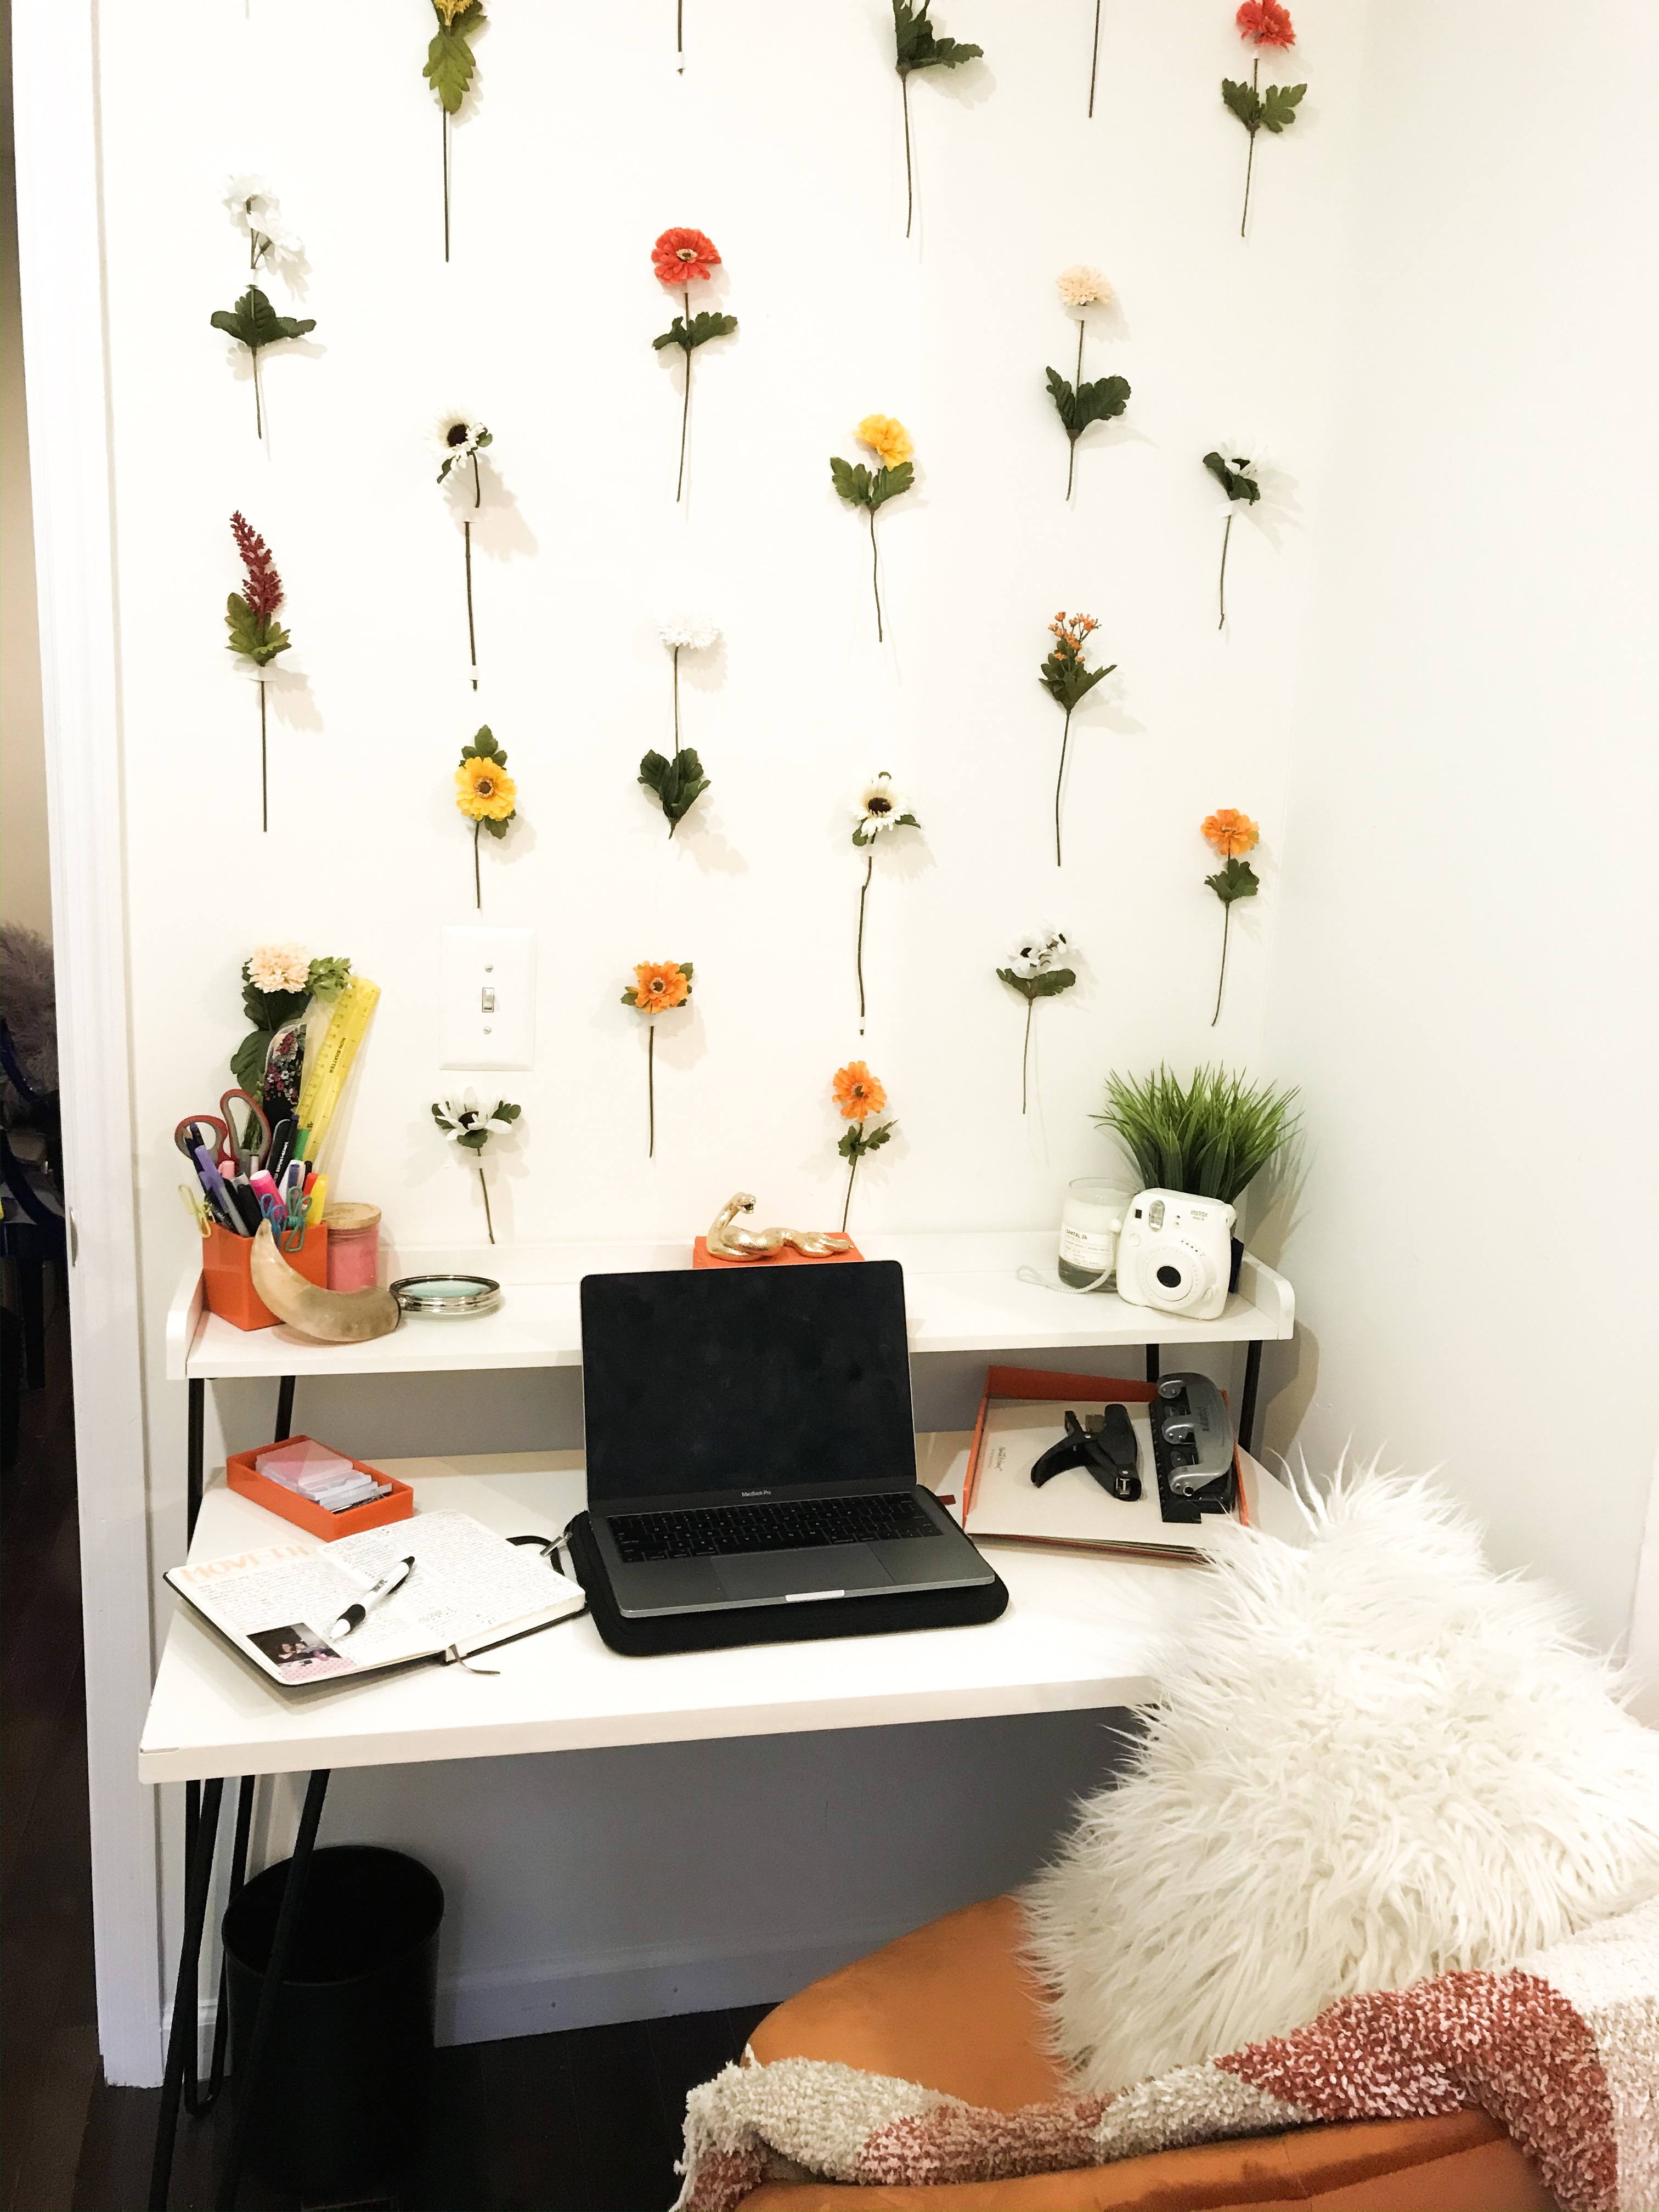 Desk in front of a decorated wall.